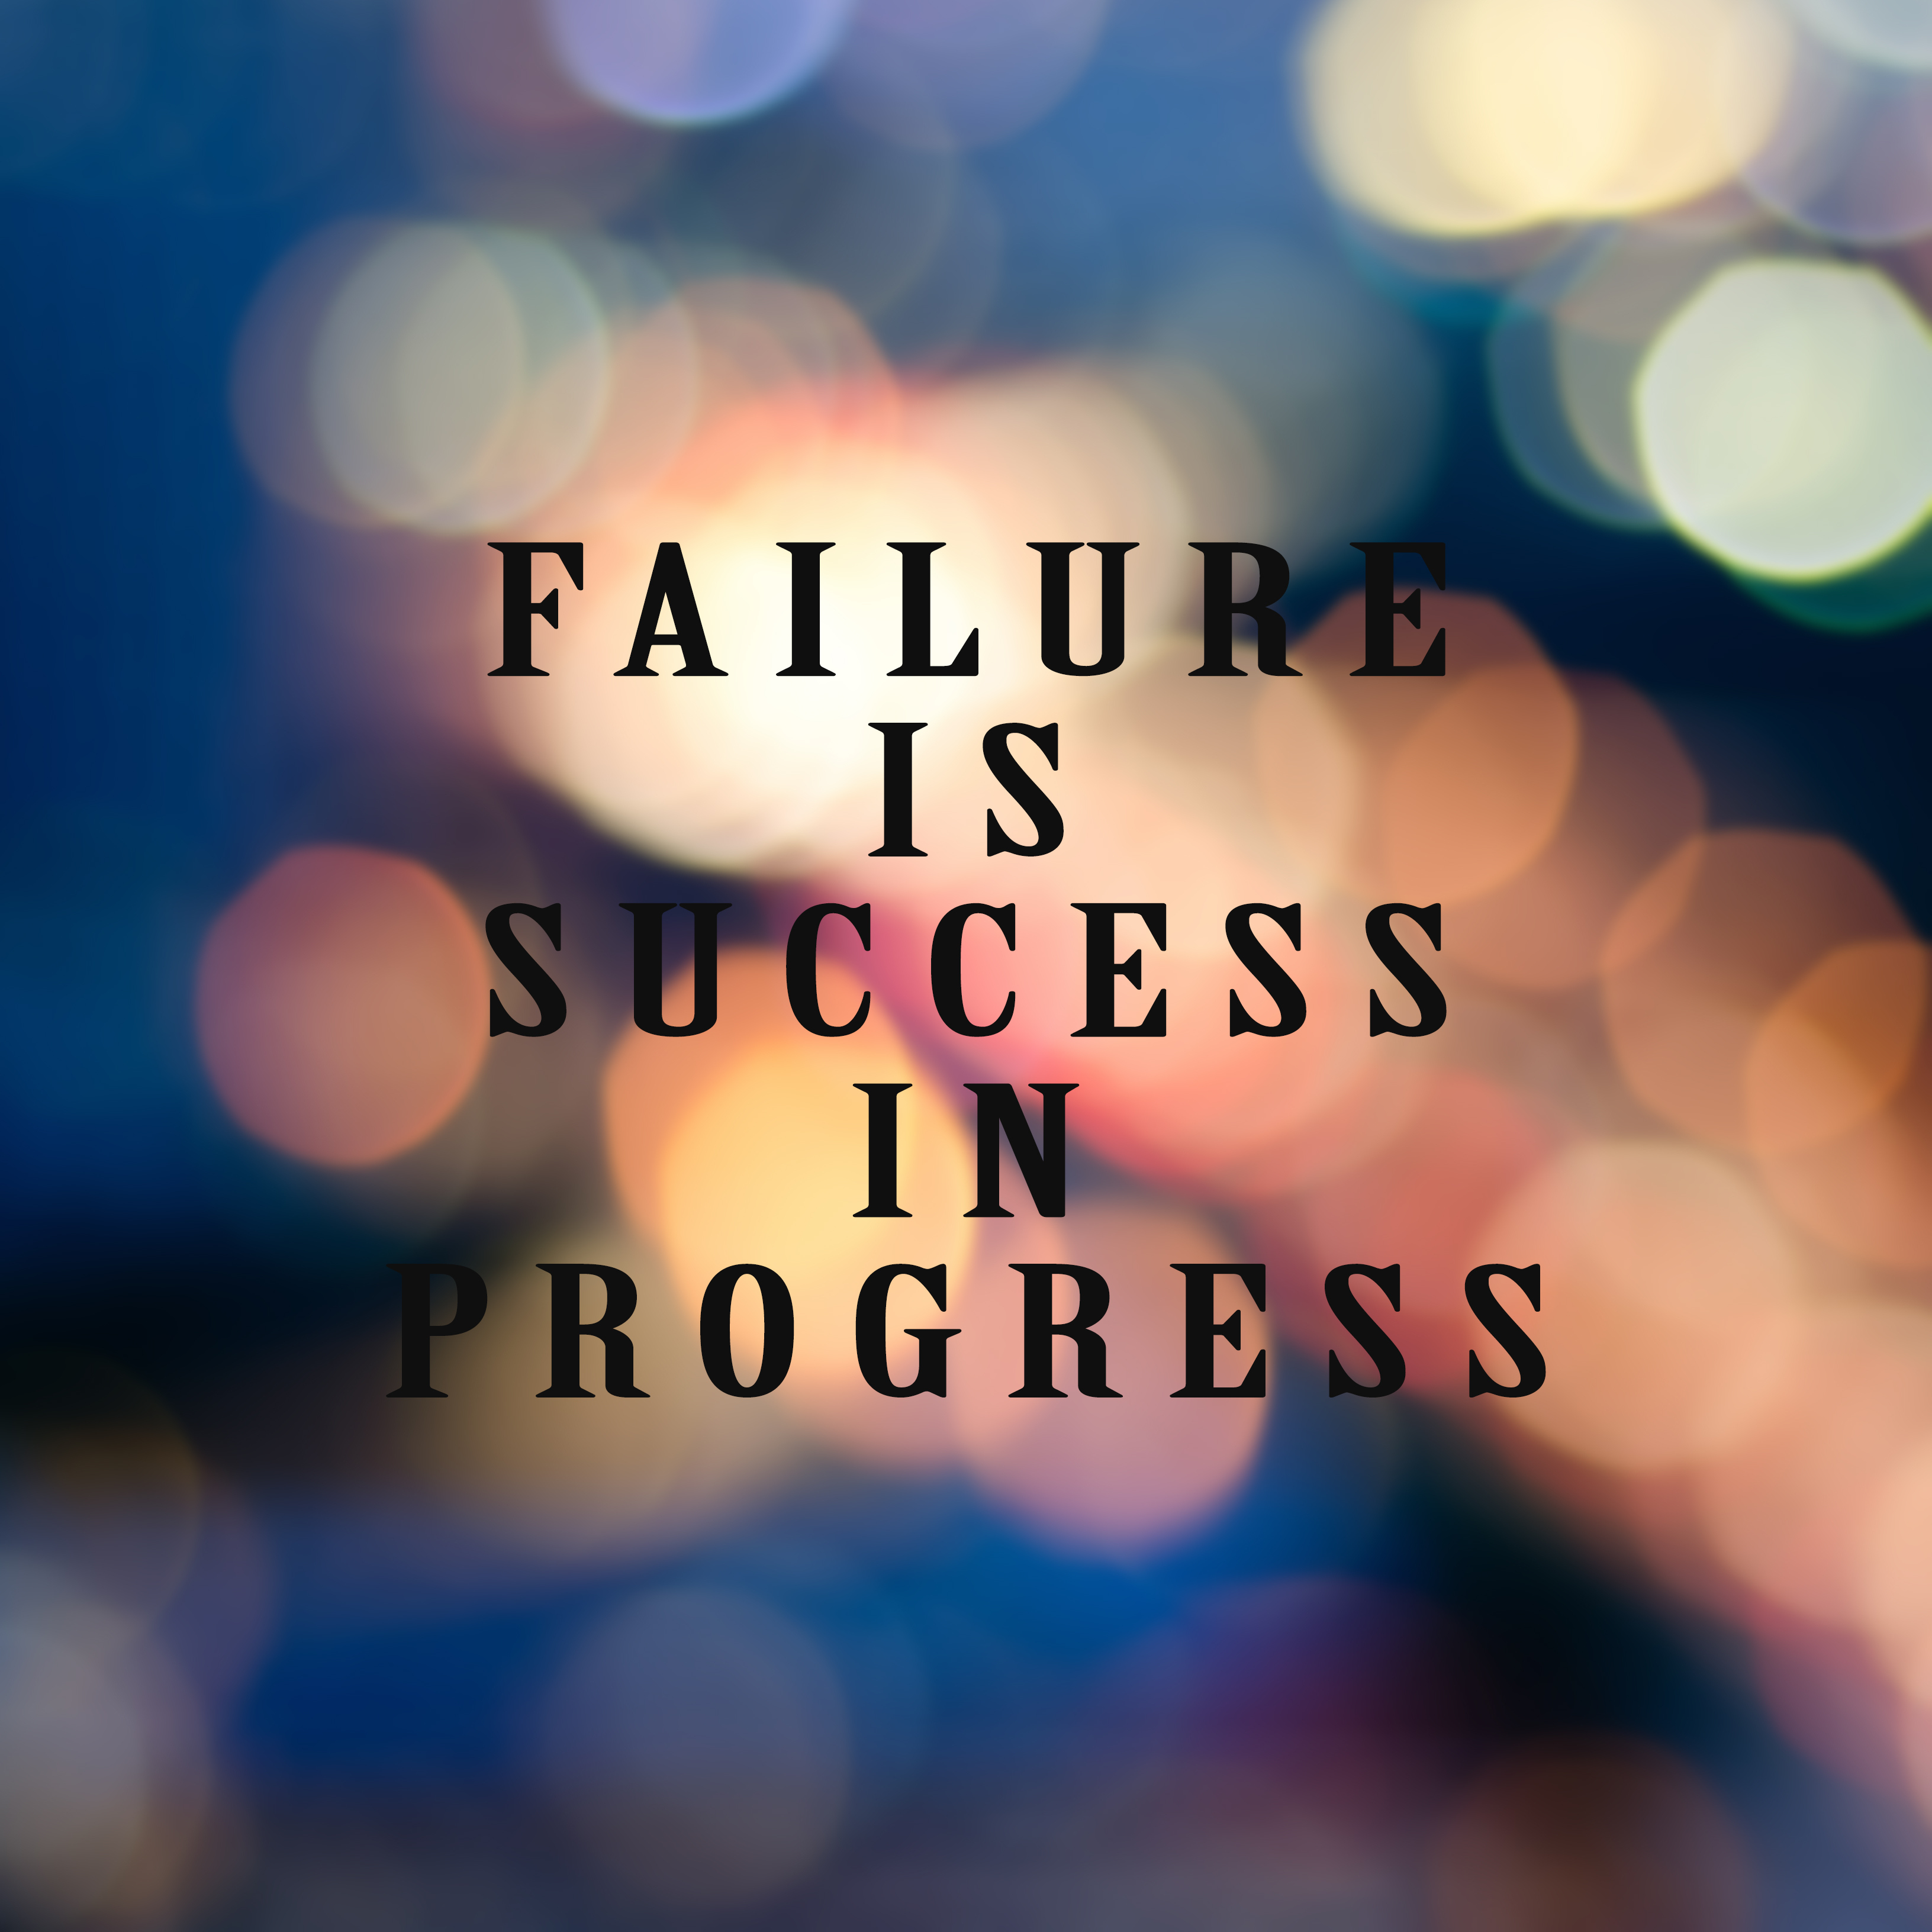 Motivational and inspirational life quotes - Failure is success in progress.jpg Blurry background (1)